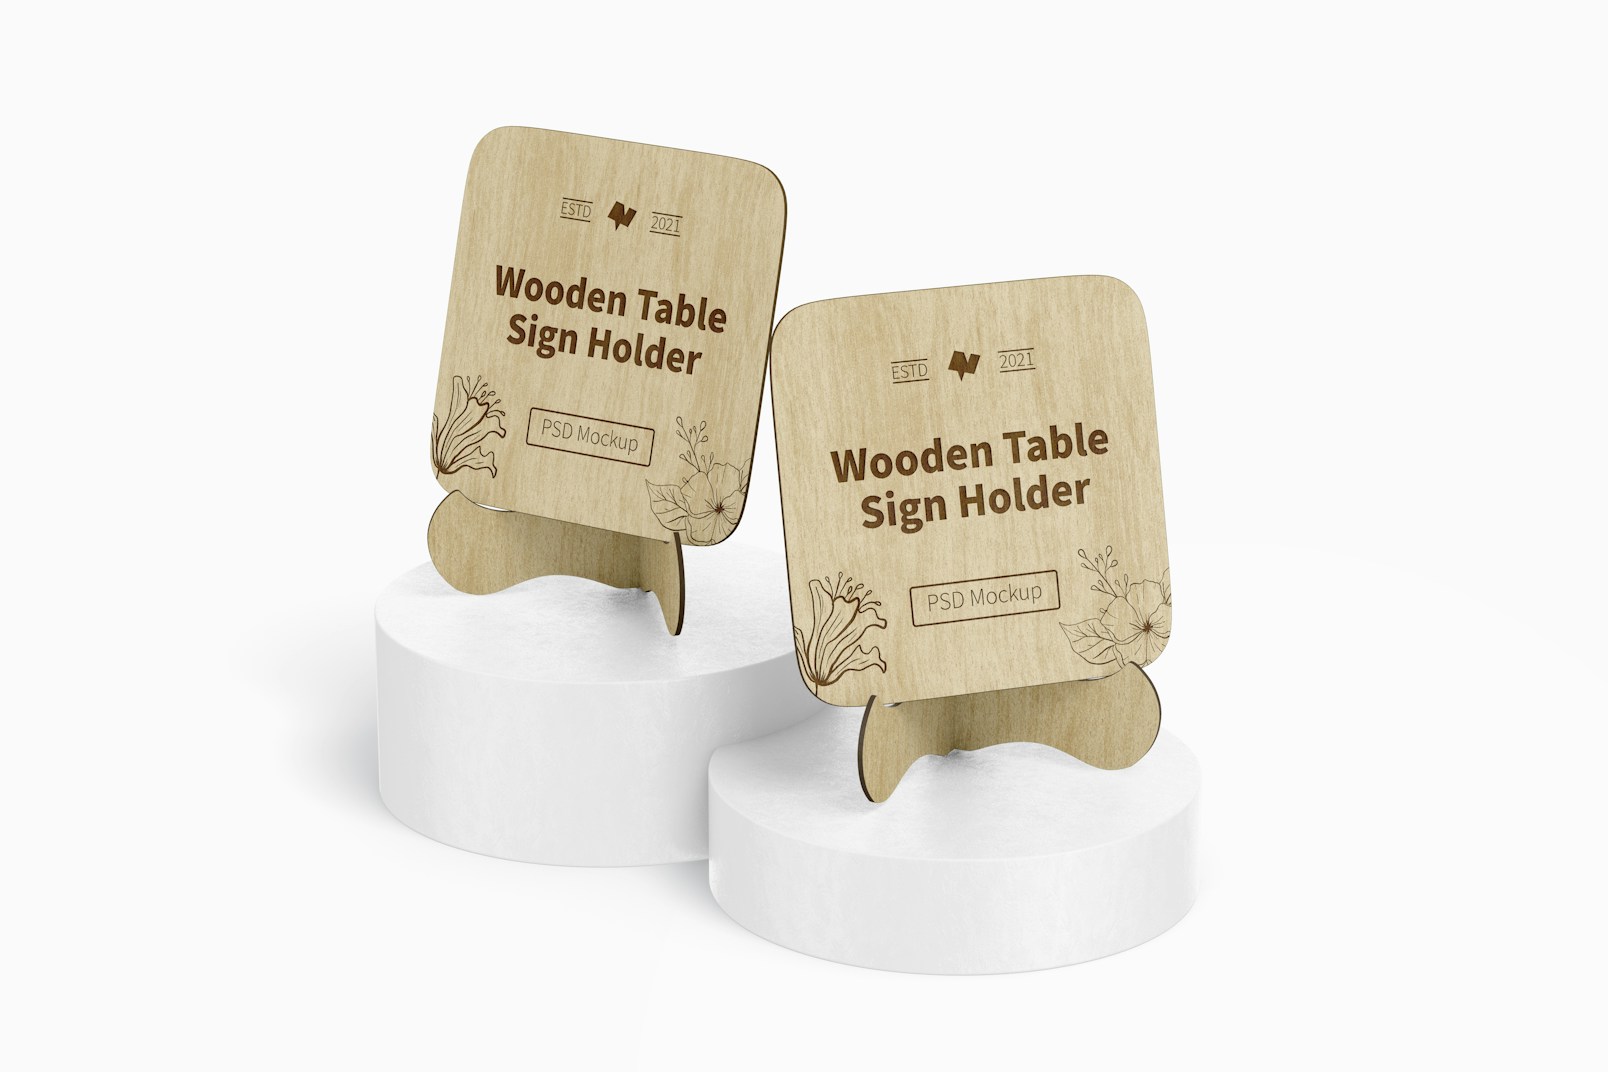 Wooden Table Sign Holders Mockup